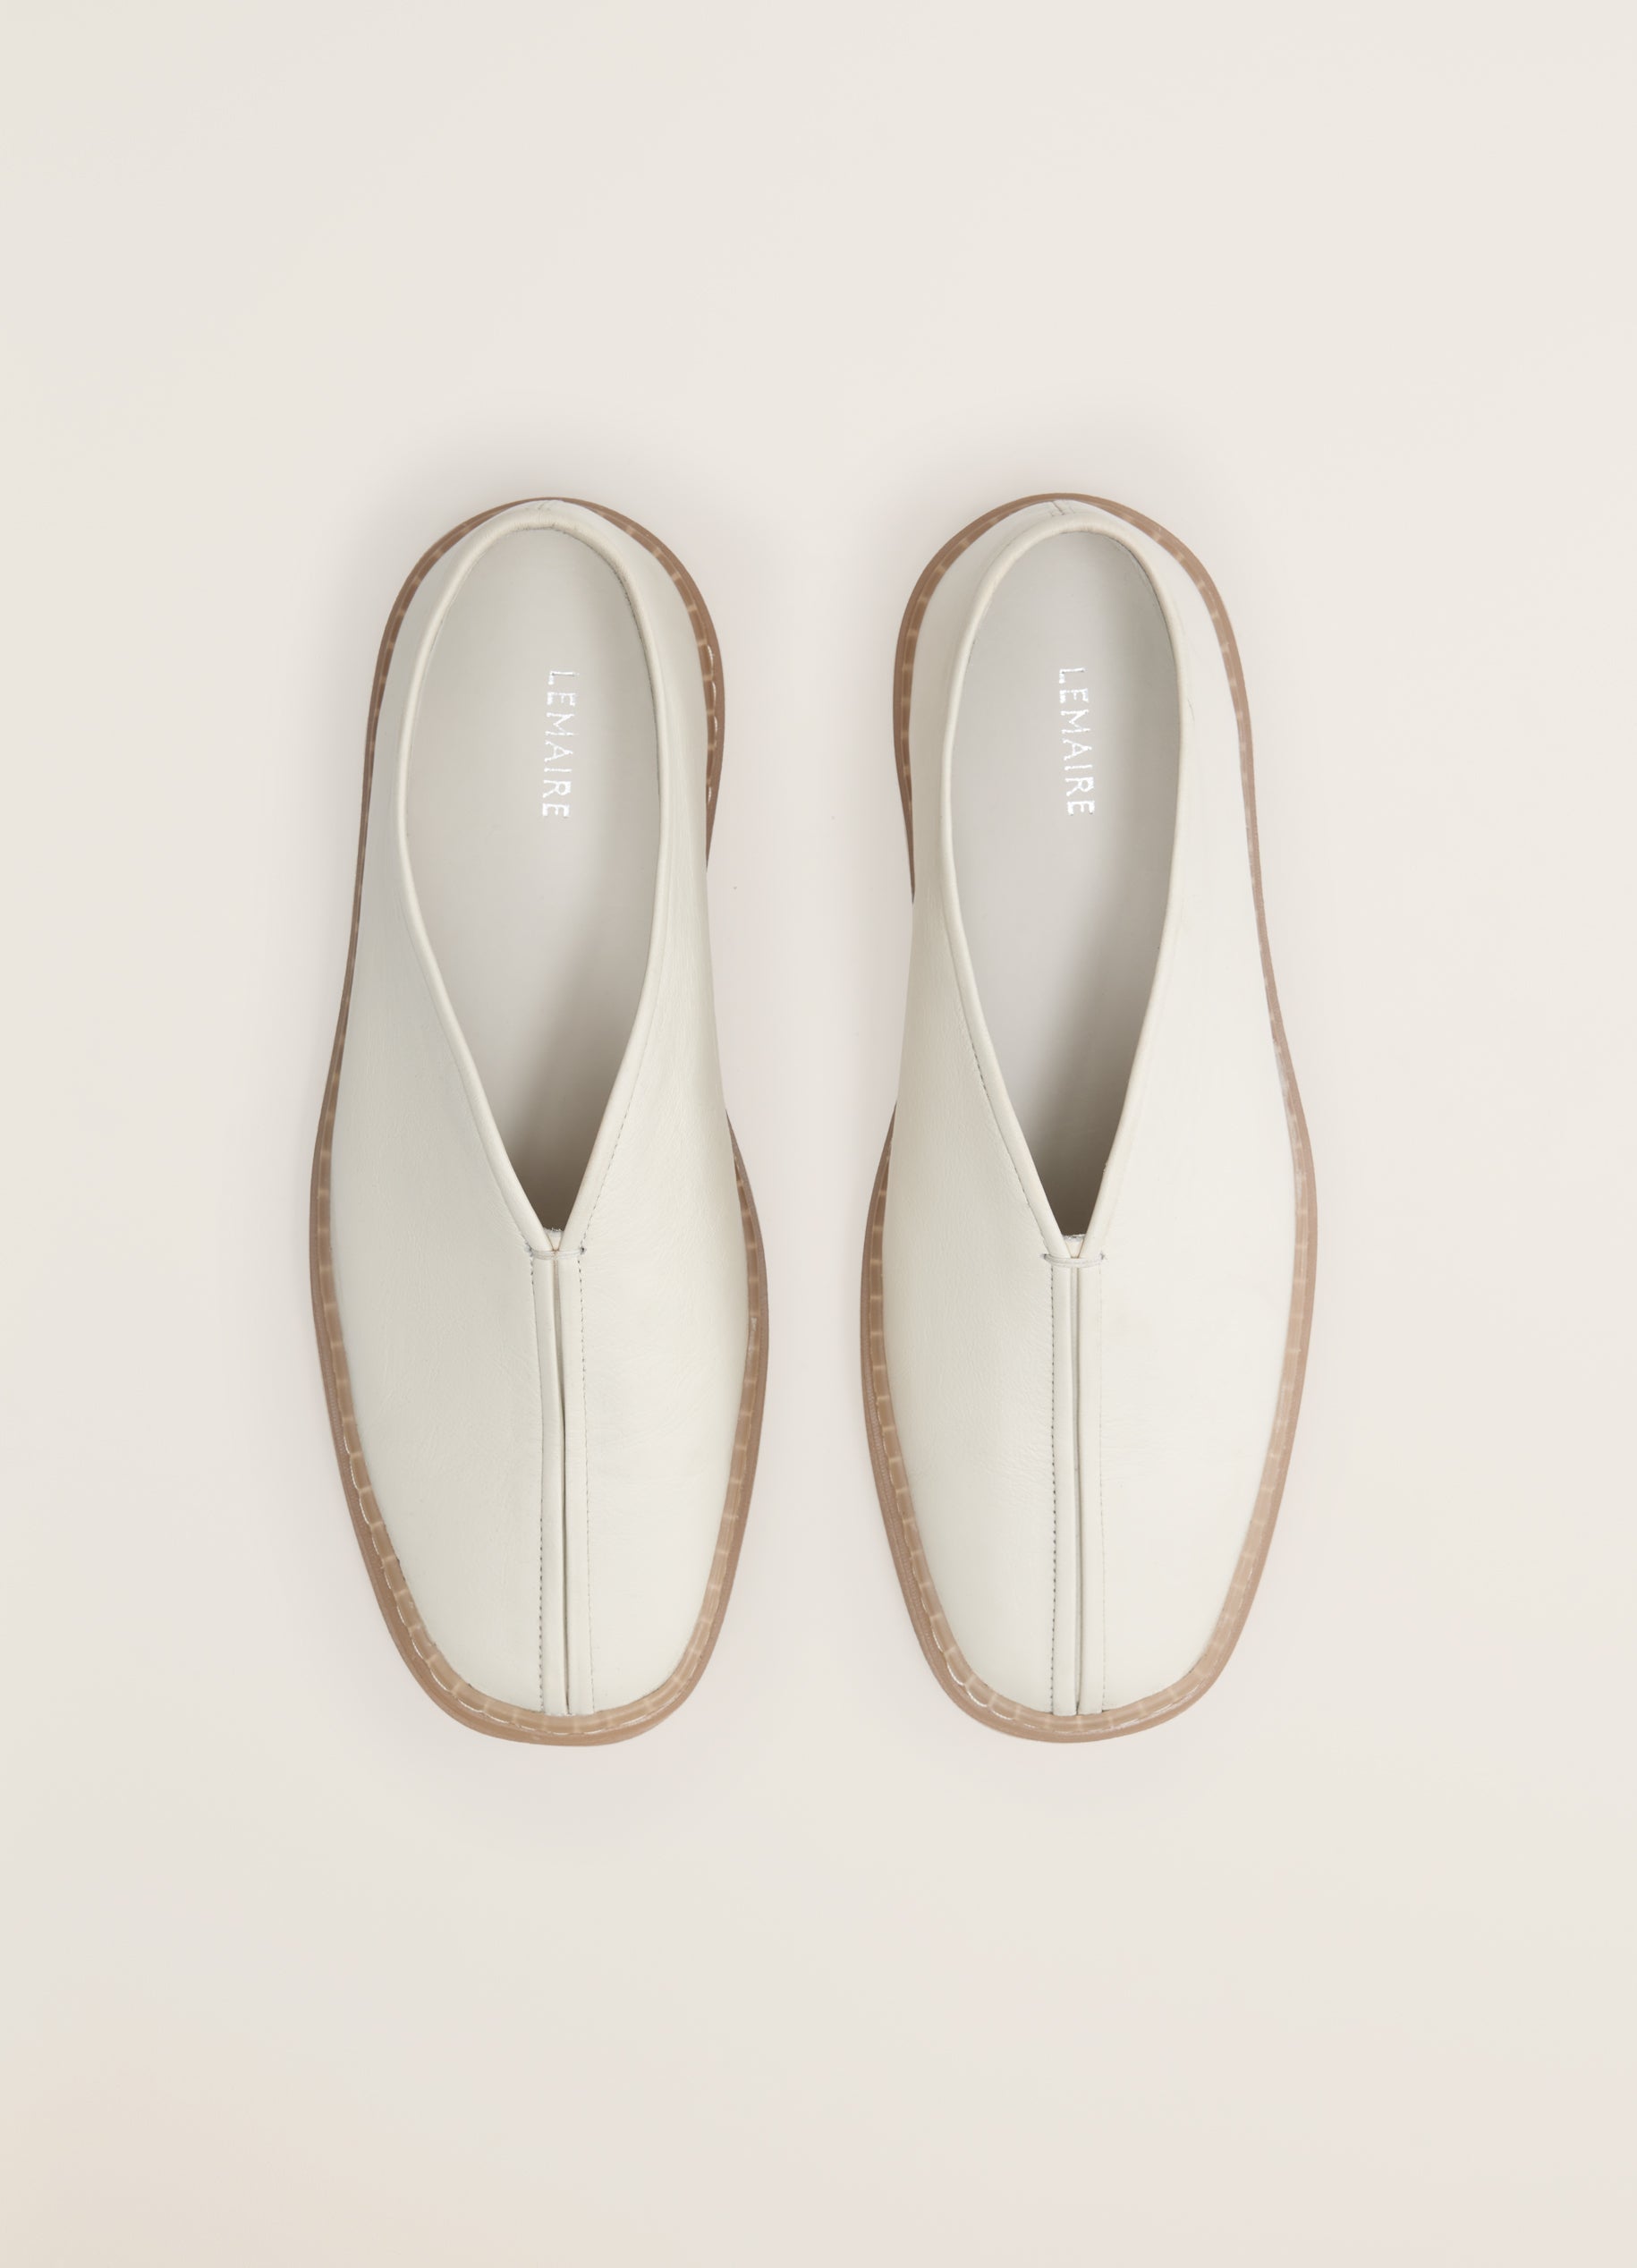 Piped Sneakers in White Clay | LEMAIRE